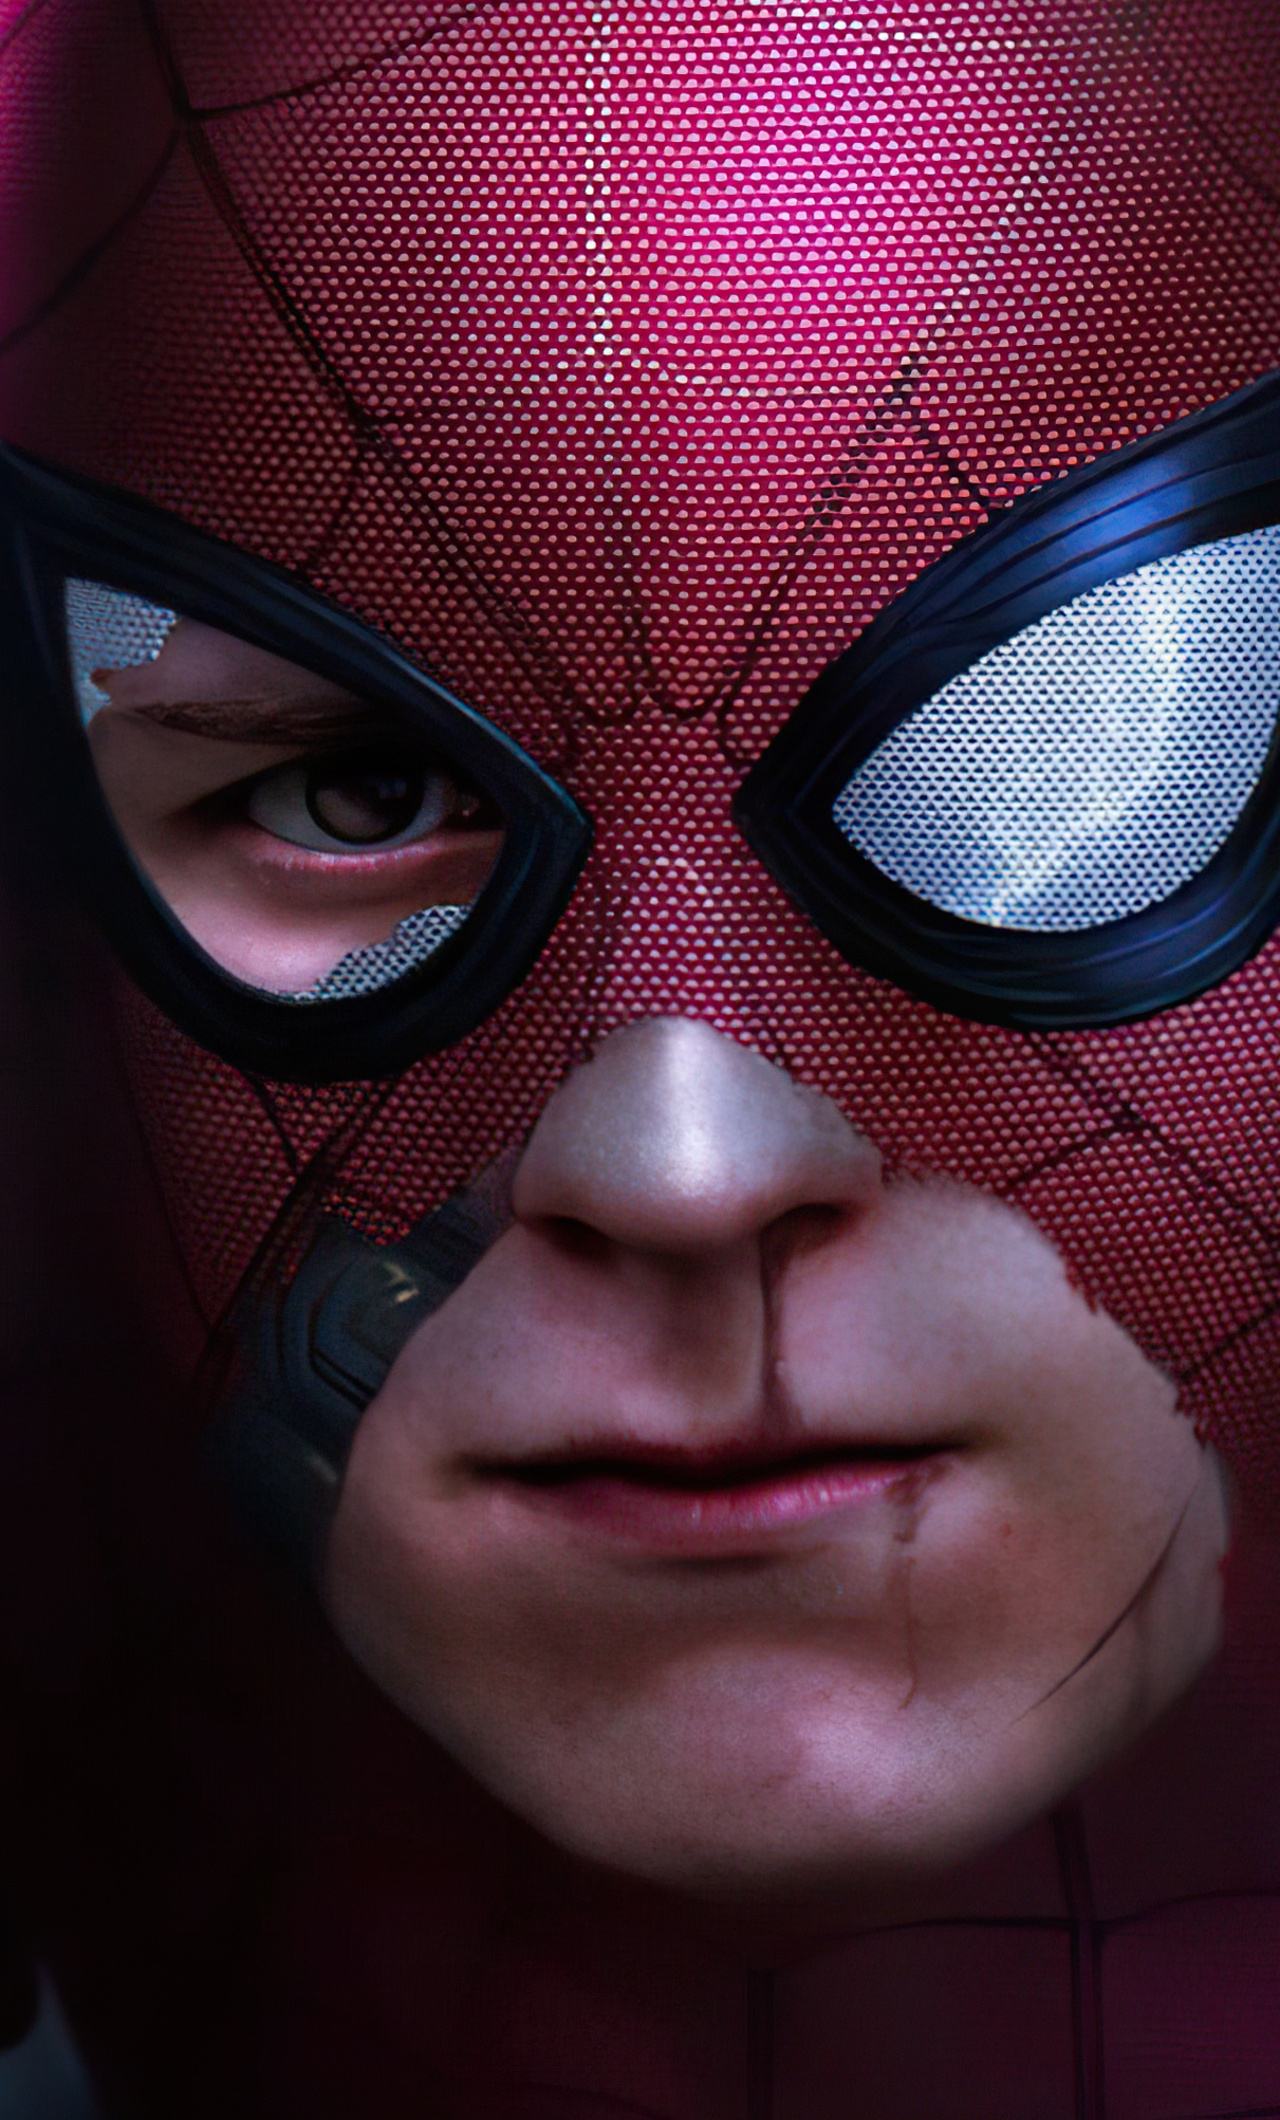 Spiderman Torn Mask Wallpapers